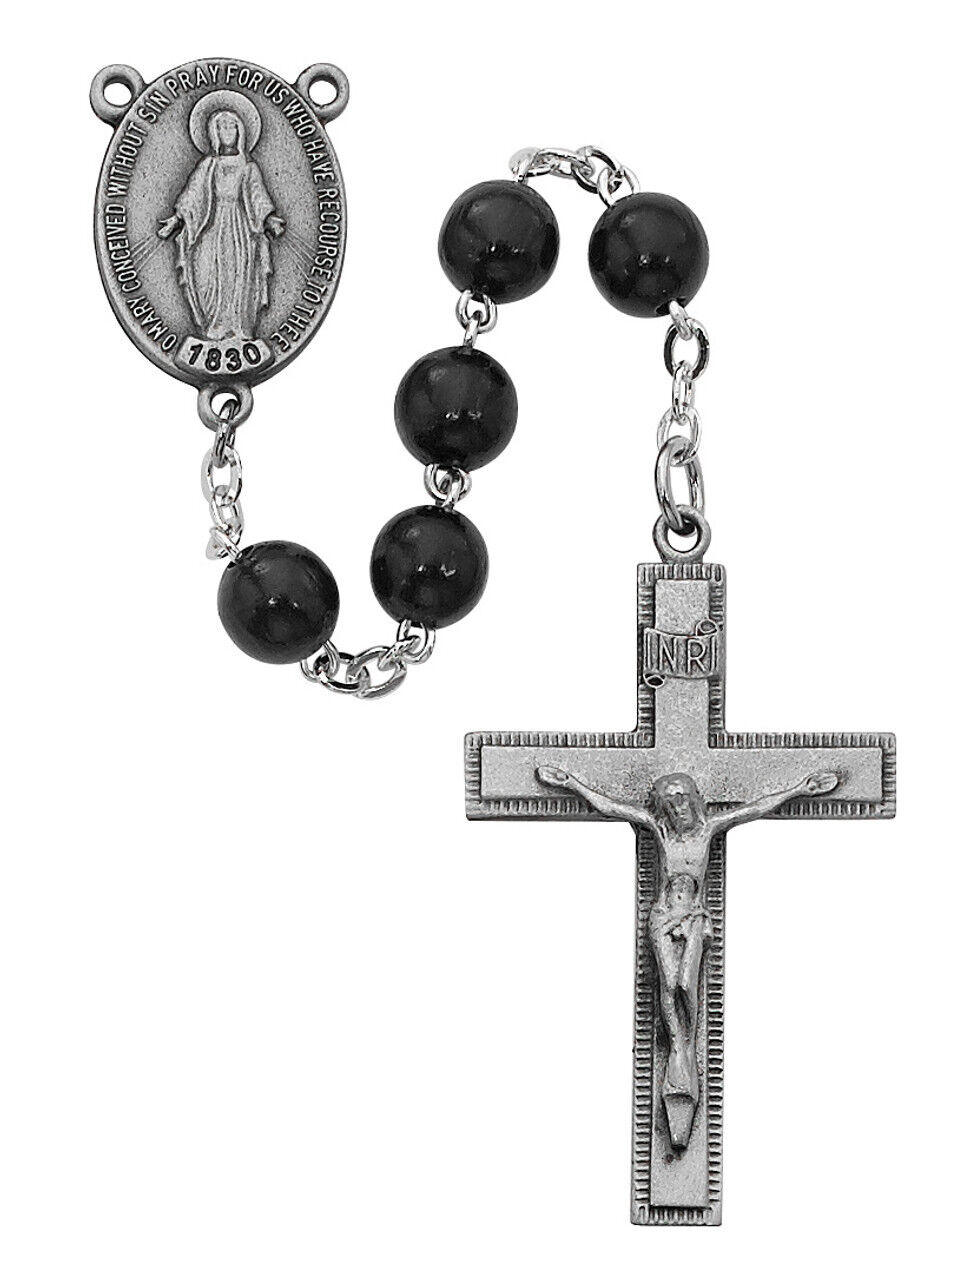 Black Wood Bead Rosary Sterling Silver Center And INRI Crucifix Christ 7mm Beads